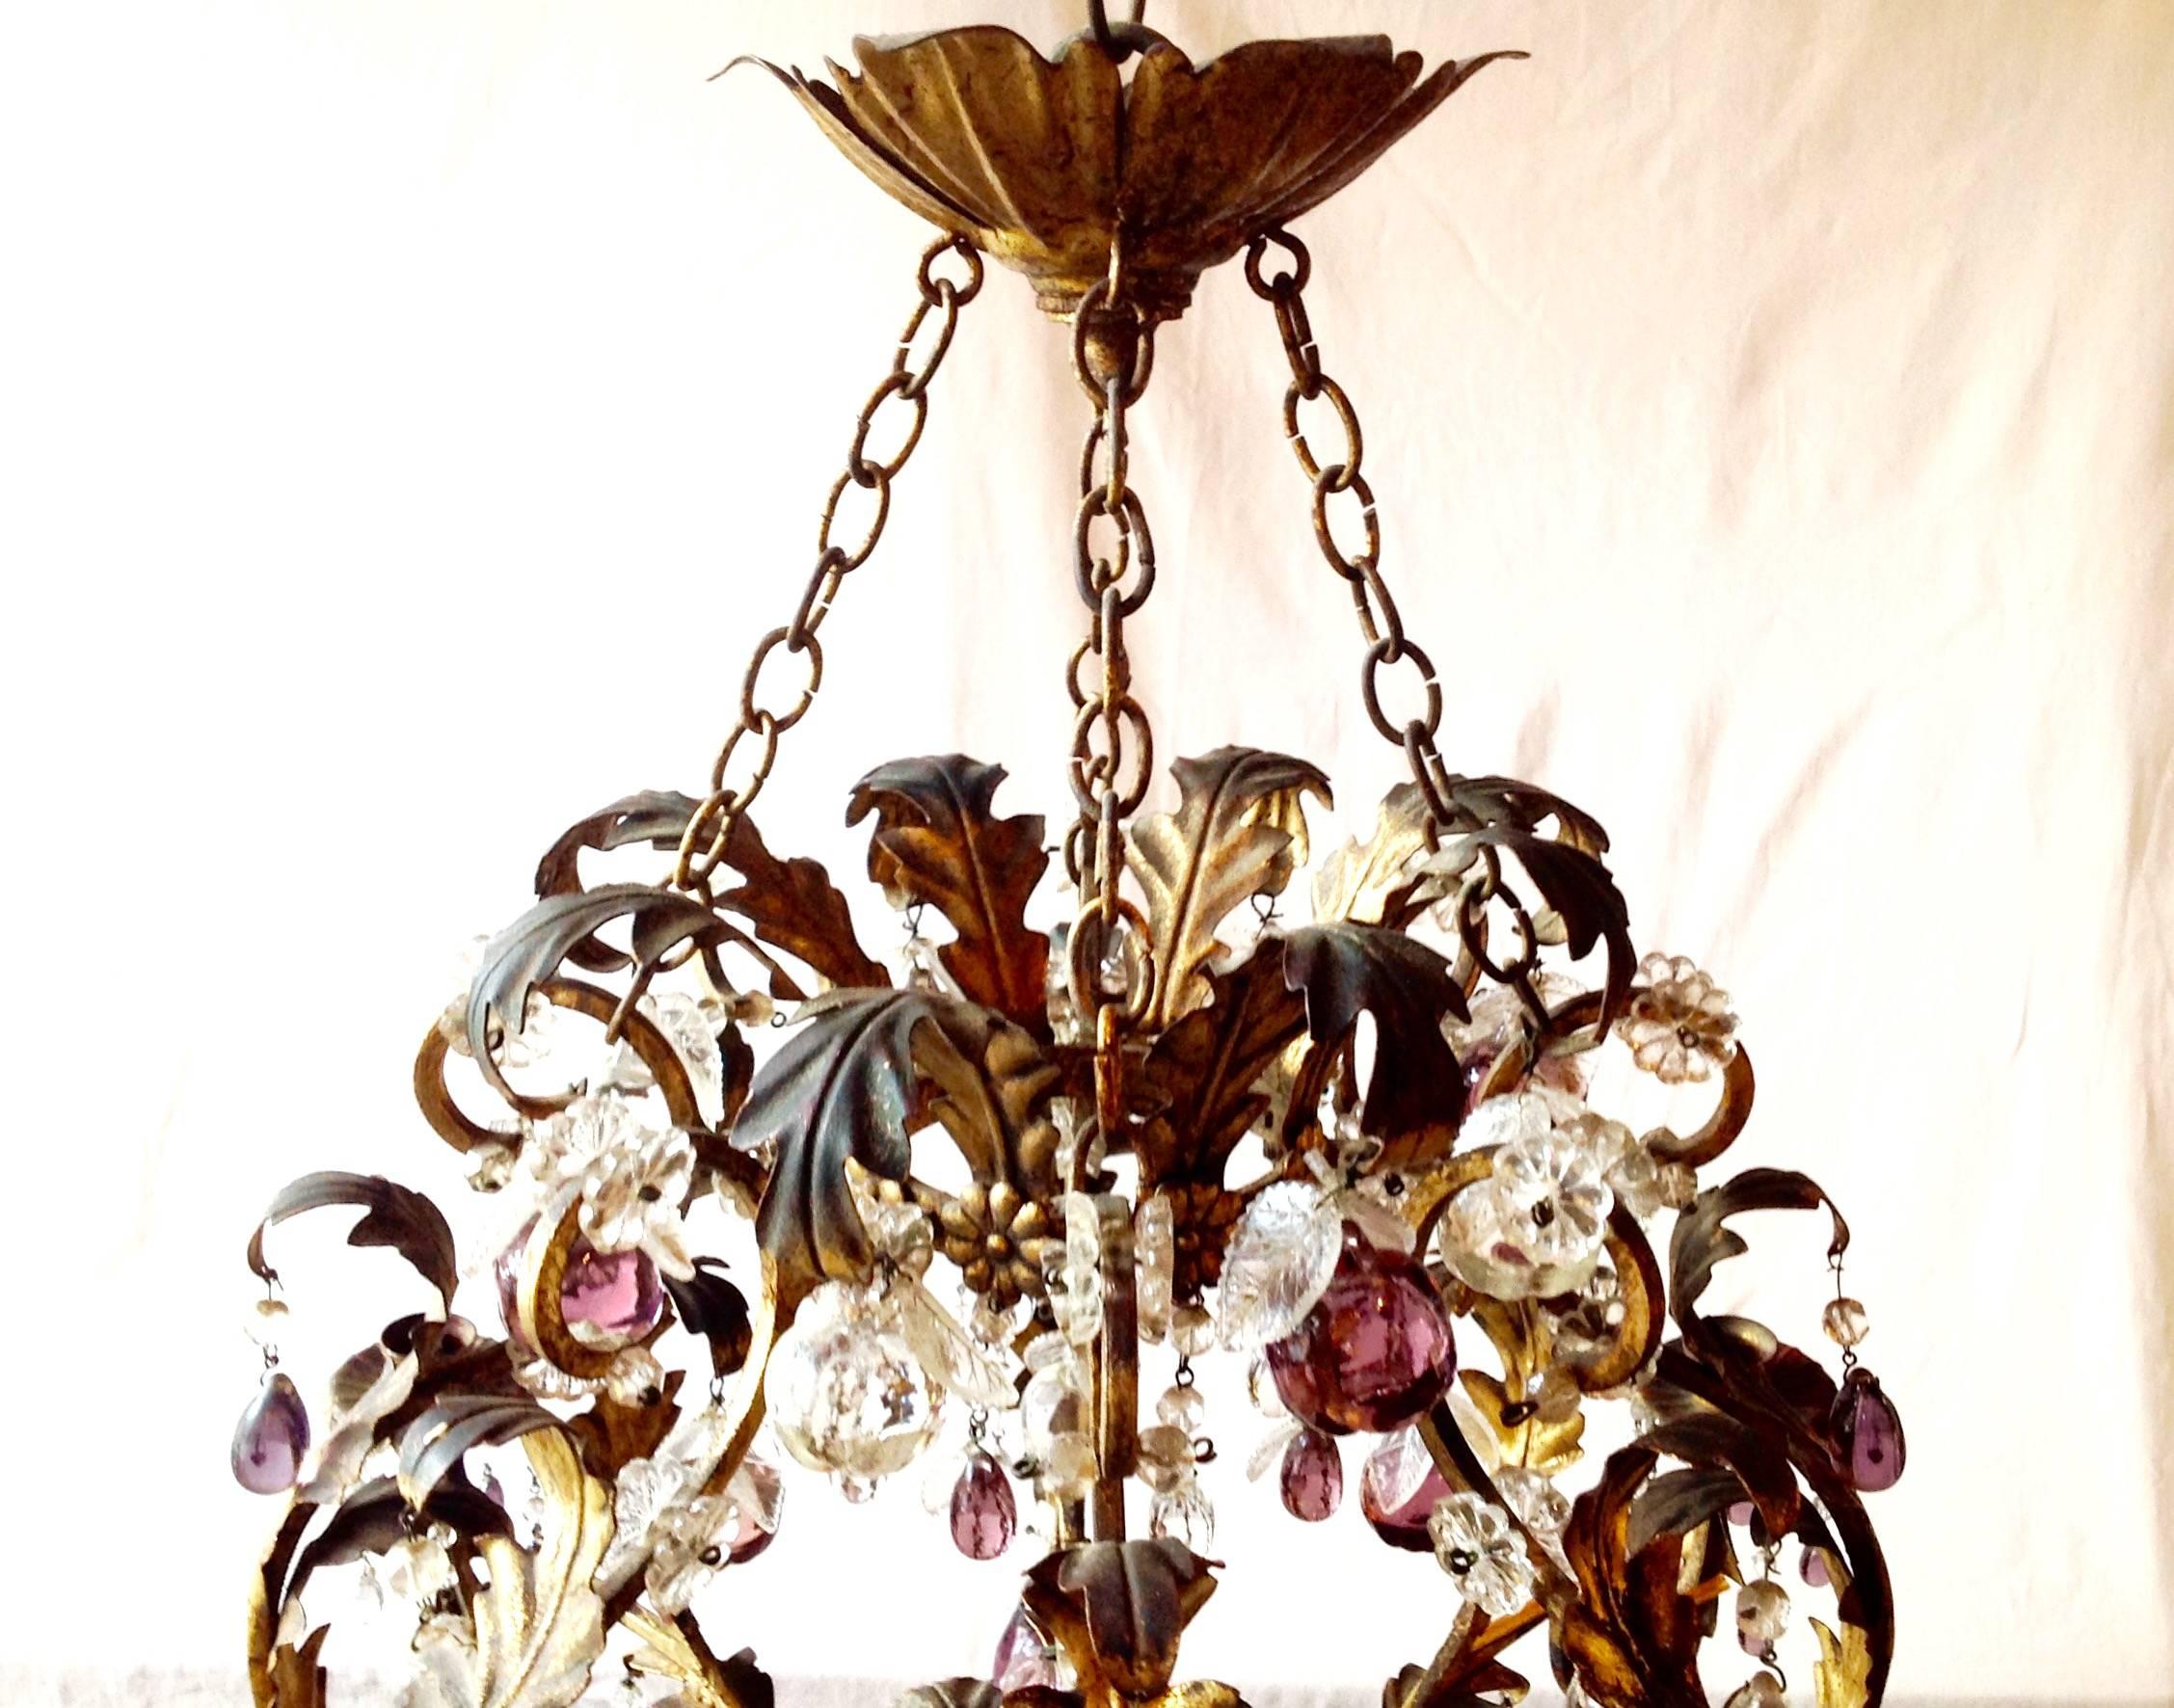 Antique Italian gold leaf tole chandelier, circa 1920. Excellent quality purple and clear fruit shaped crystals. Measures 26 by 26.